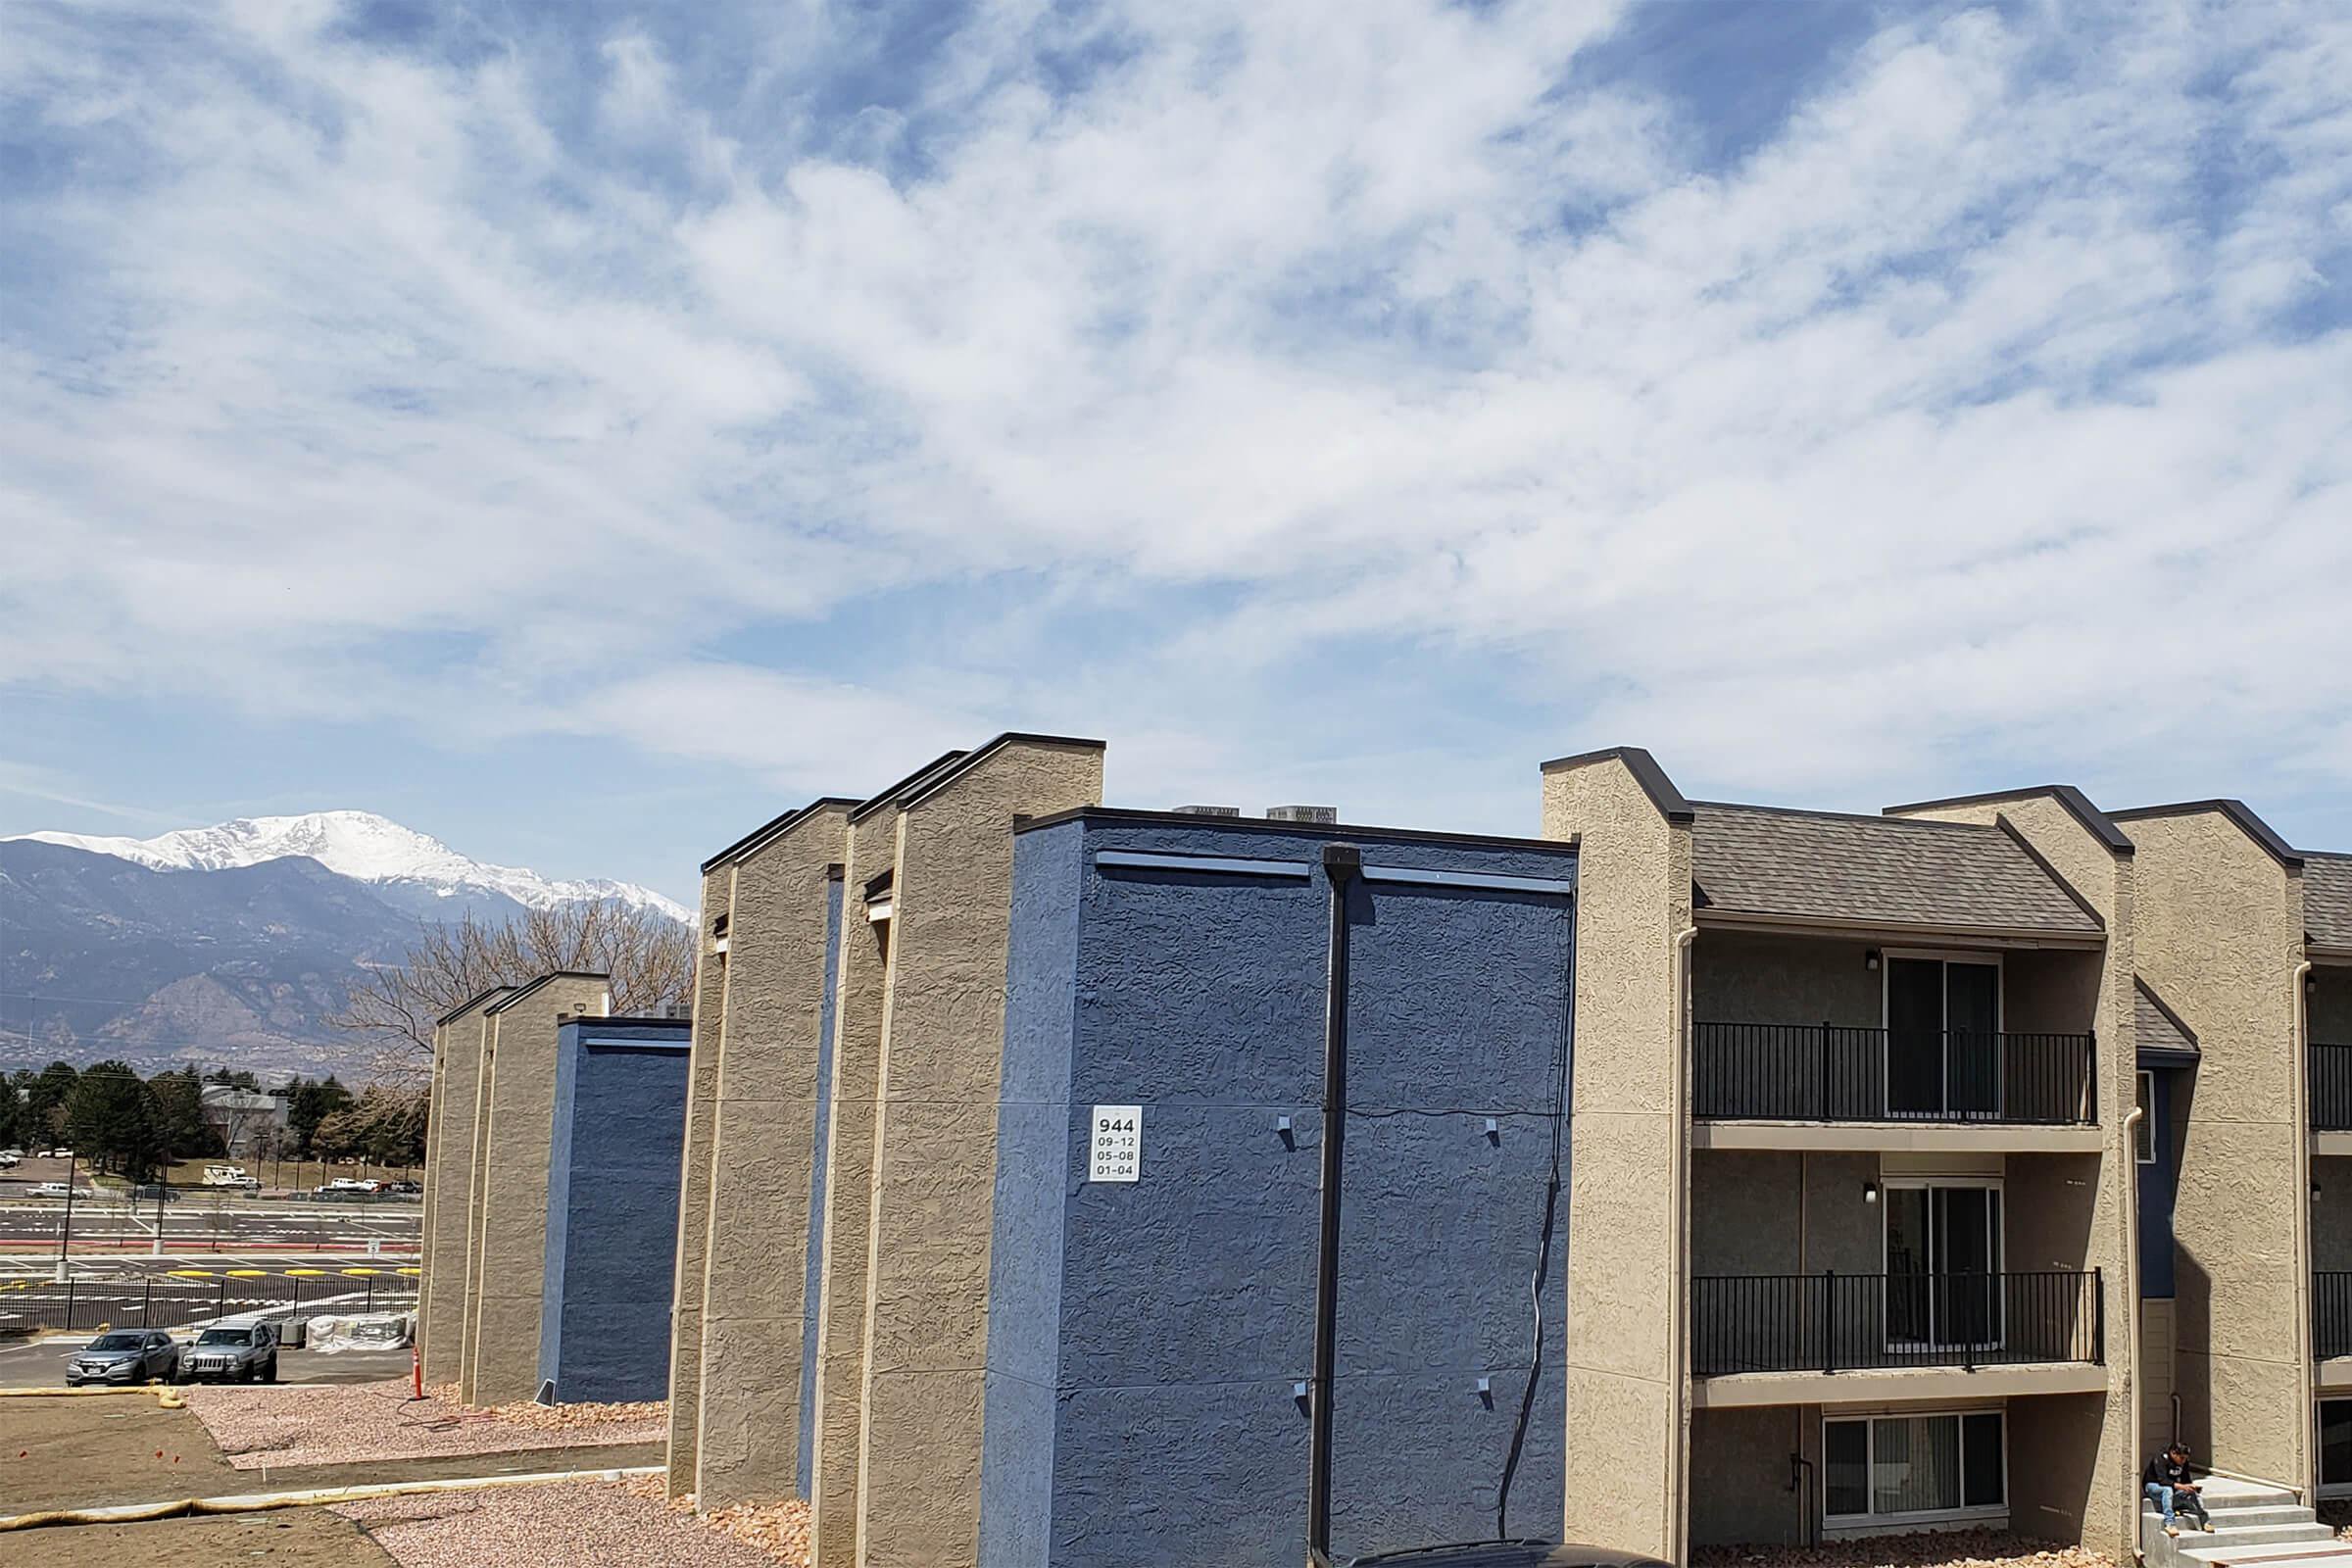 Buildings featuring balconies with a view of the mountains in the background at Parc at Prairie Grass, located in Colorado Springs, CO